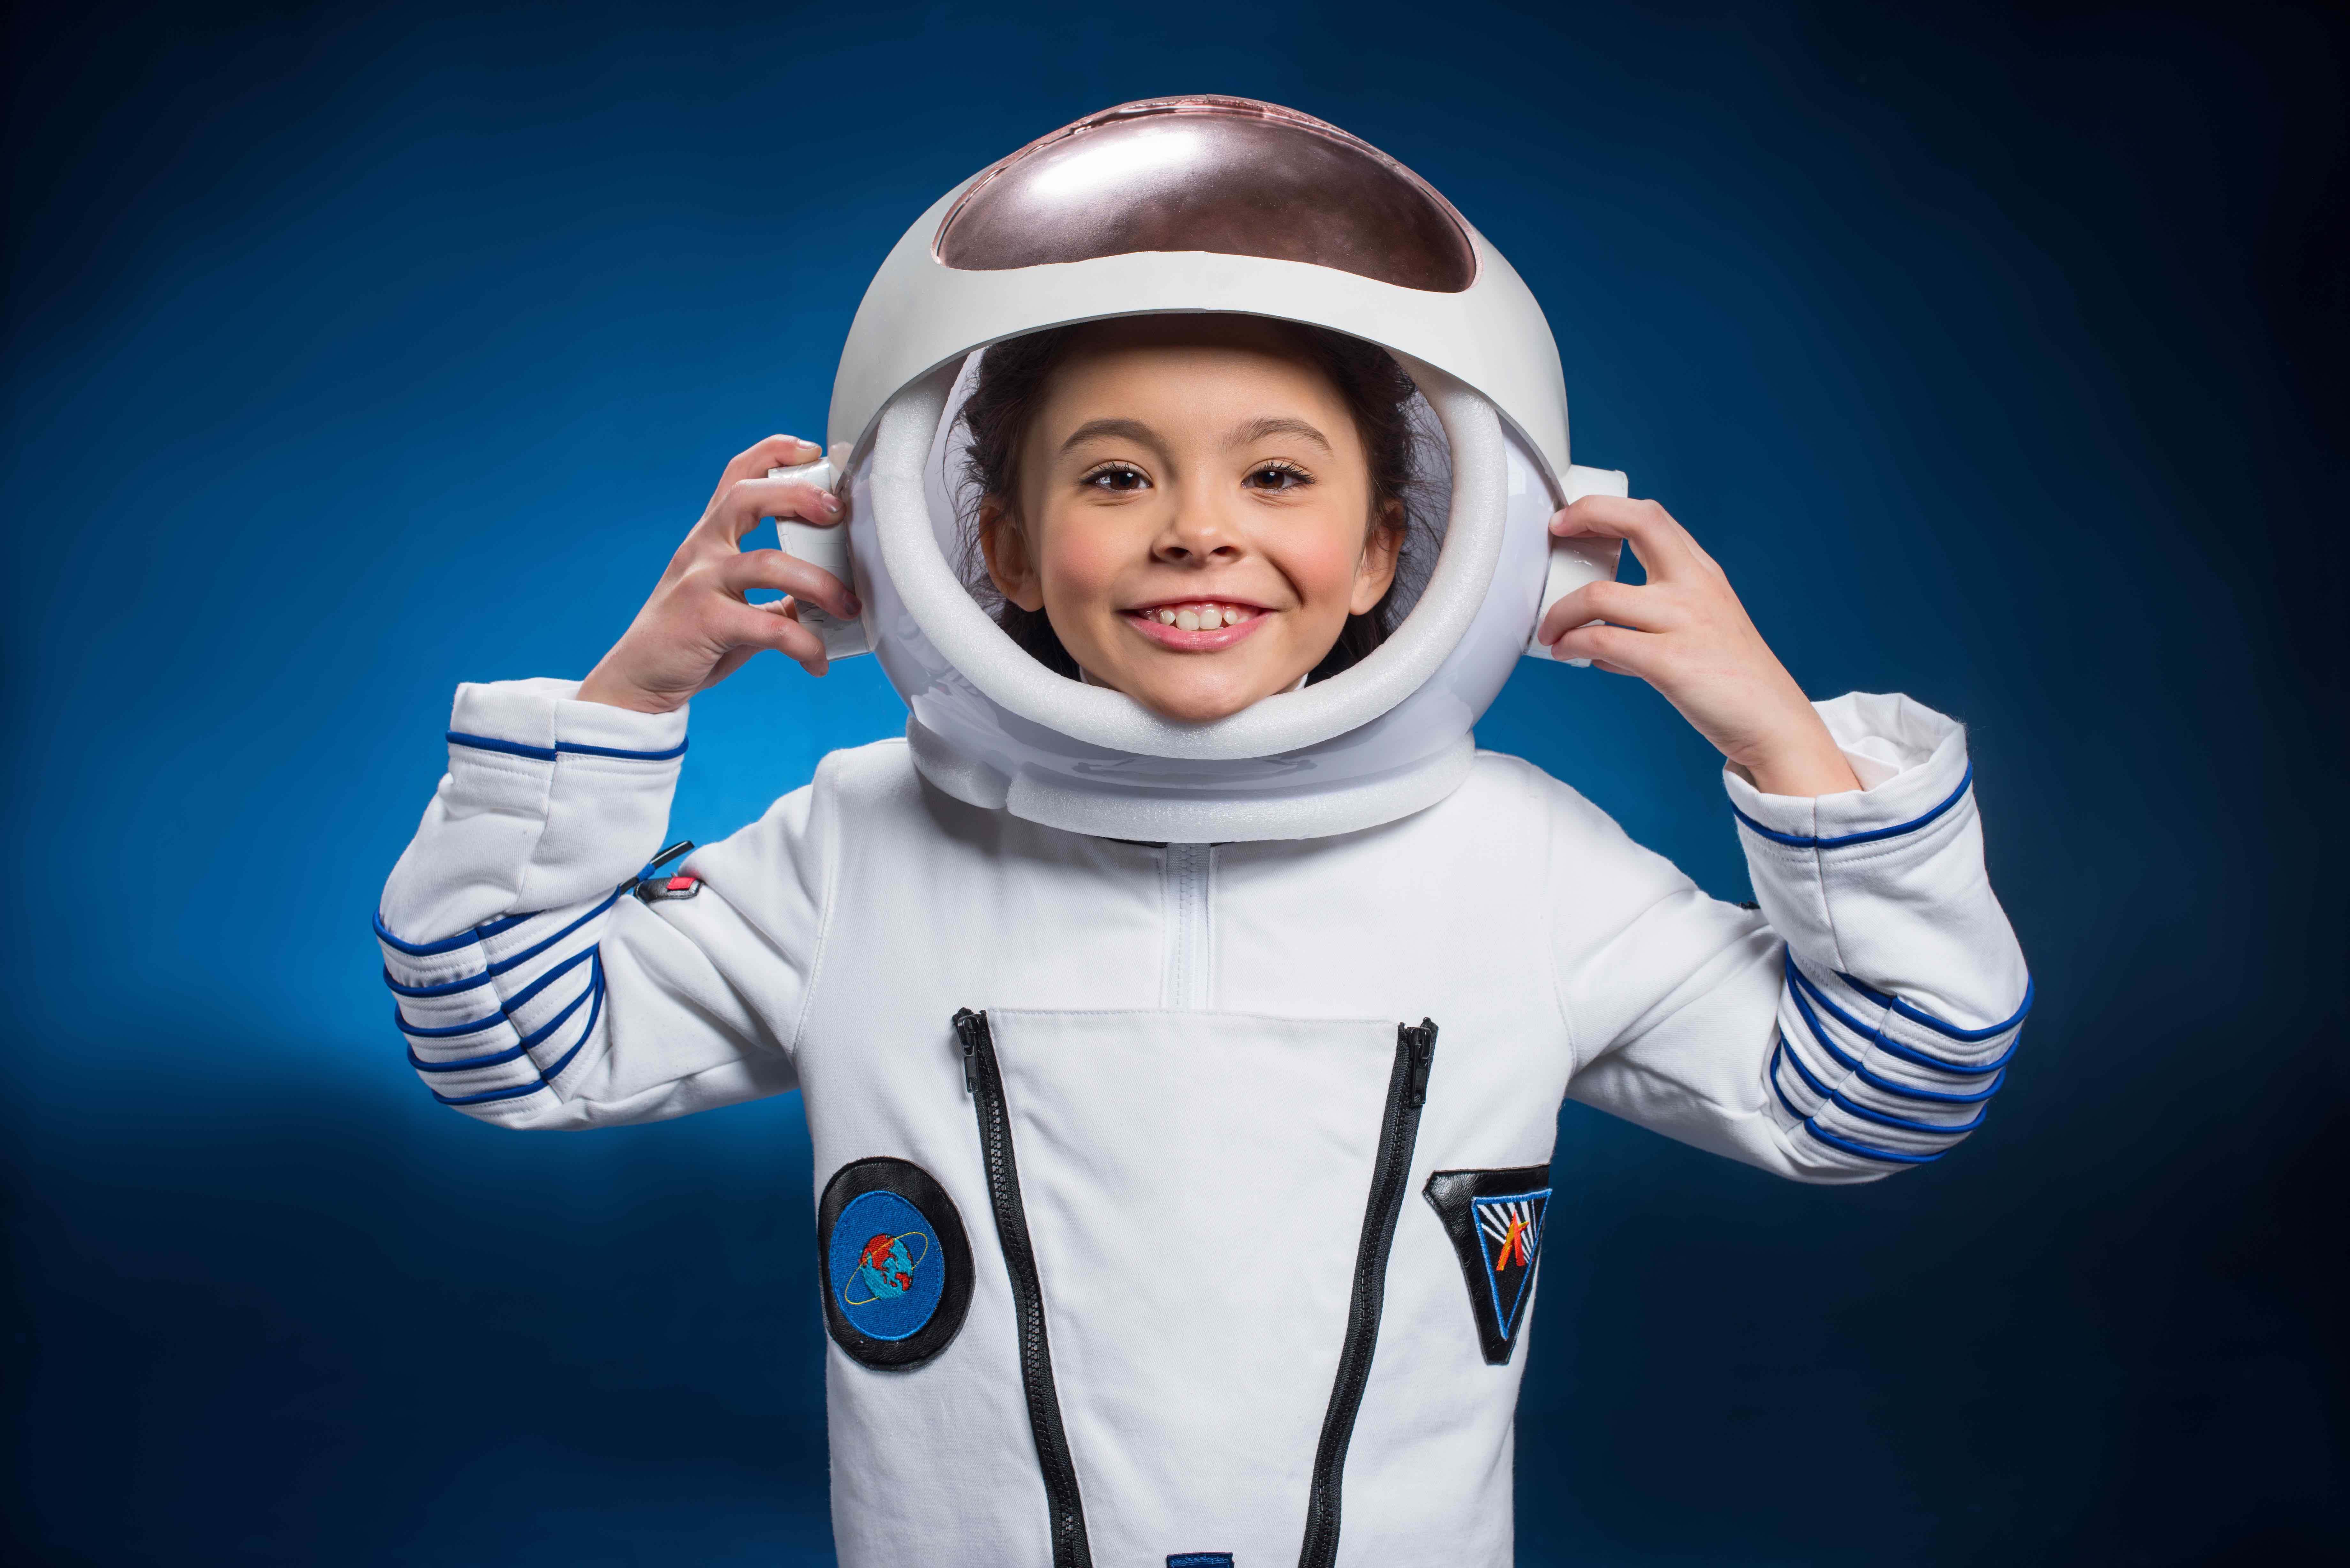 A girl wears a space suit and smiles are she holds up her space helmet.